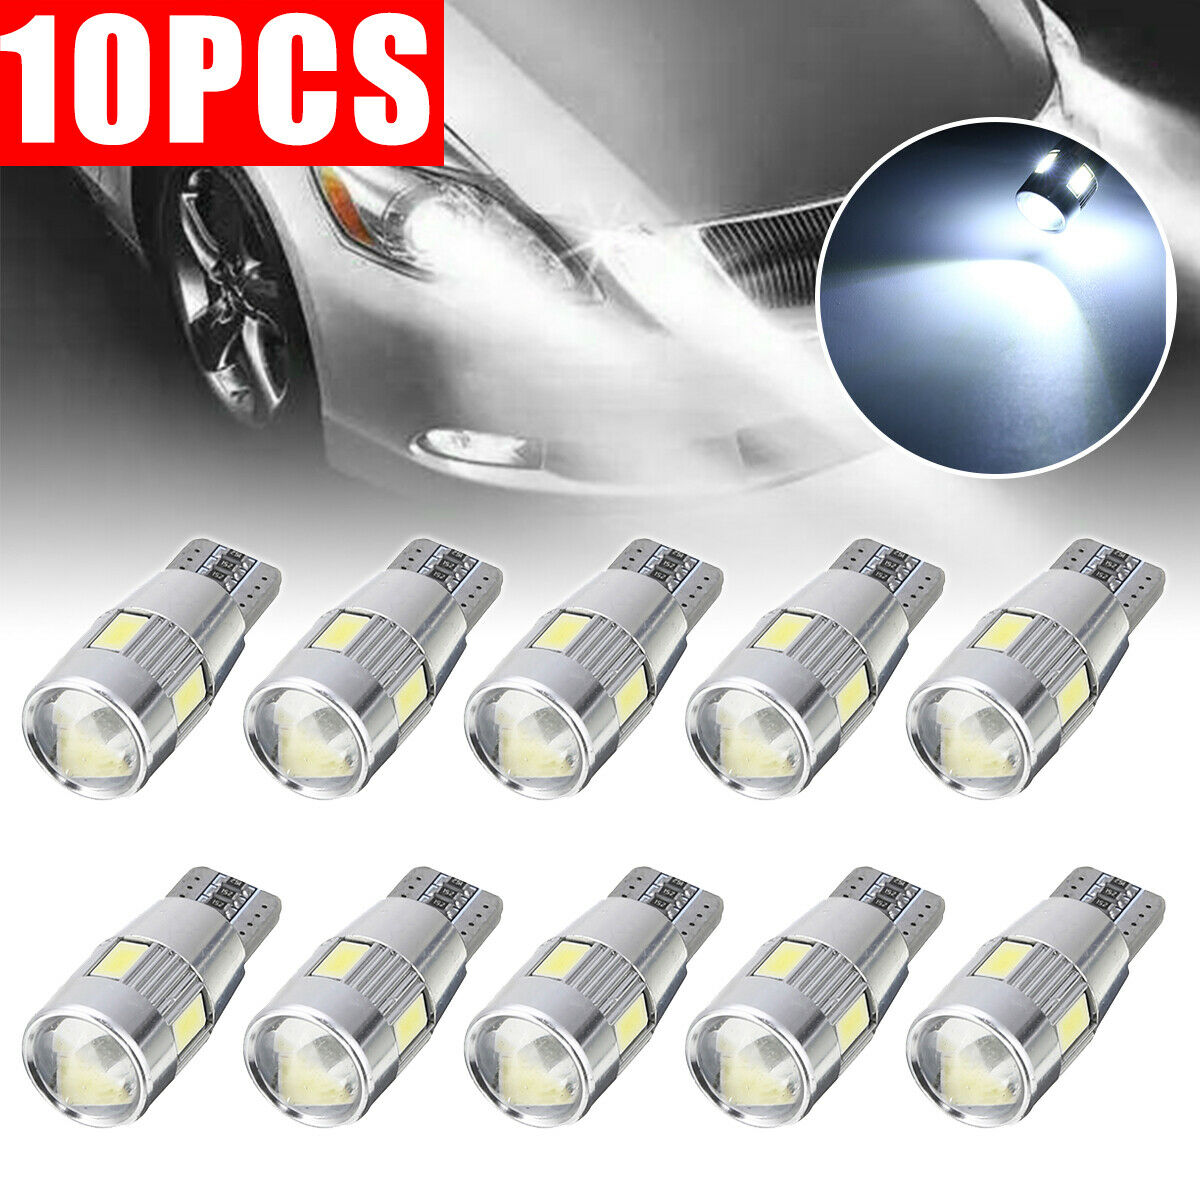 High Key 4x T10 501 Car Bulbs Led Error Free Canbus SMD Cob White Ice Blue W5W Side Light Replacement for Car Interior Dome Map Door Dashboard Trunk Courtesy License Plate Light 4x, Ice Blue